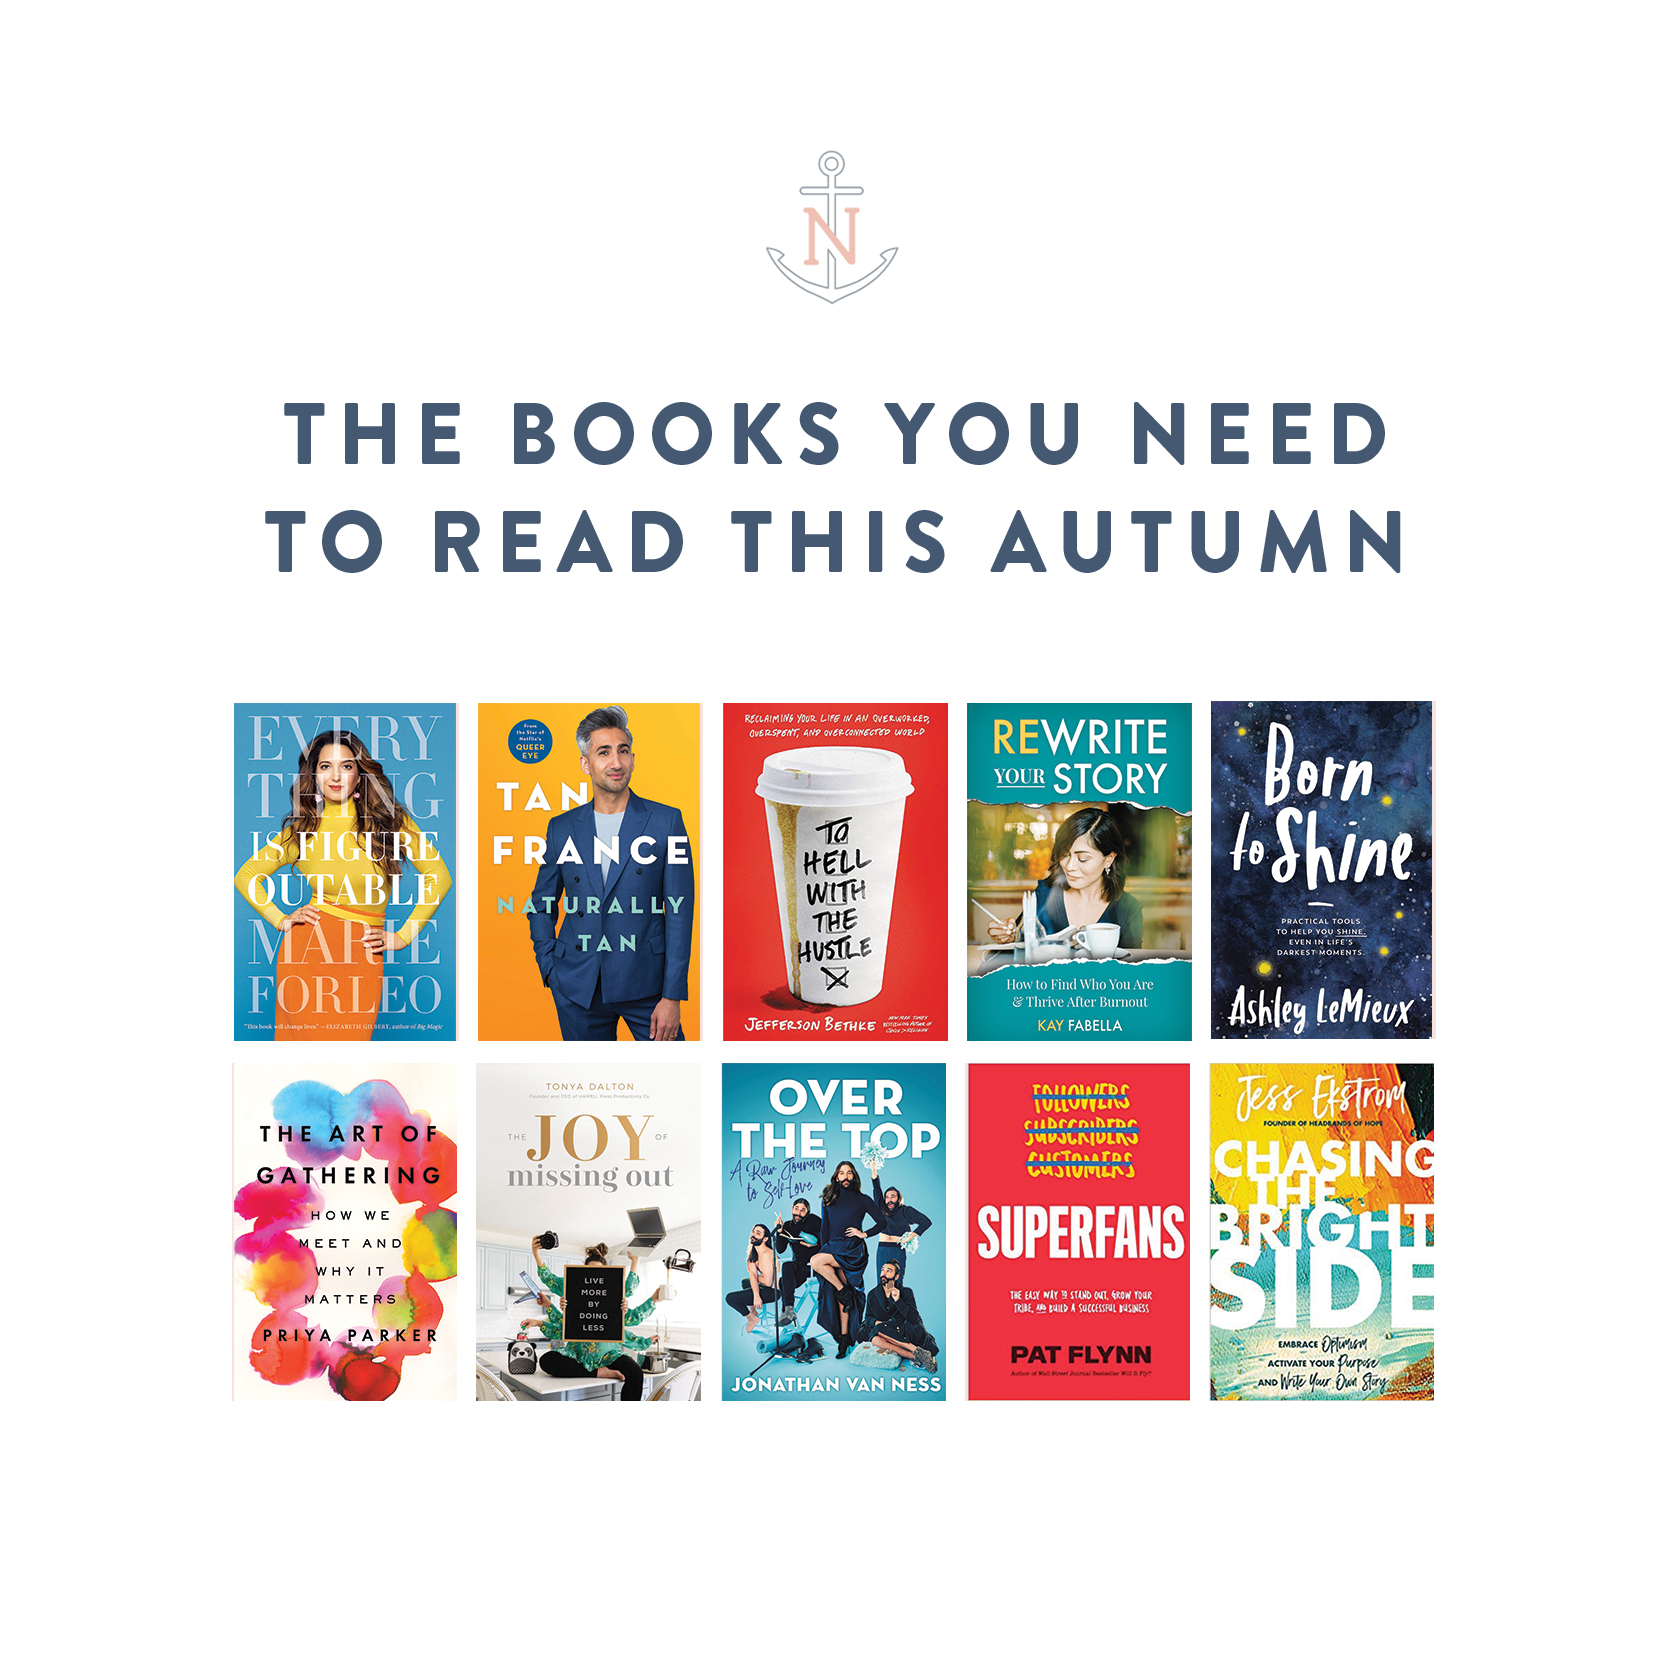 Autumn Reading List 2019 for Entrepreneurs, Bloggers, and Small Business Owners by Natalie Franke